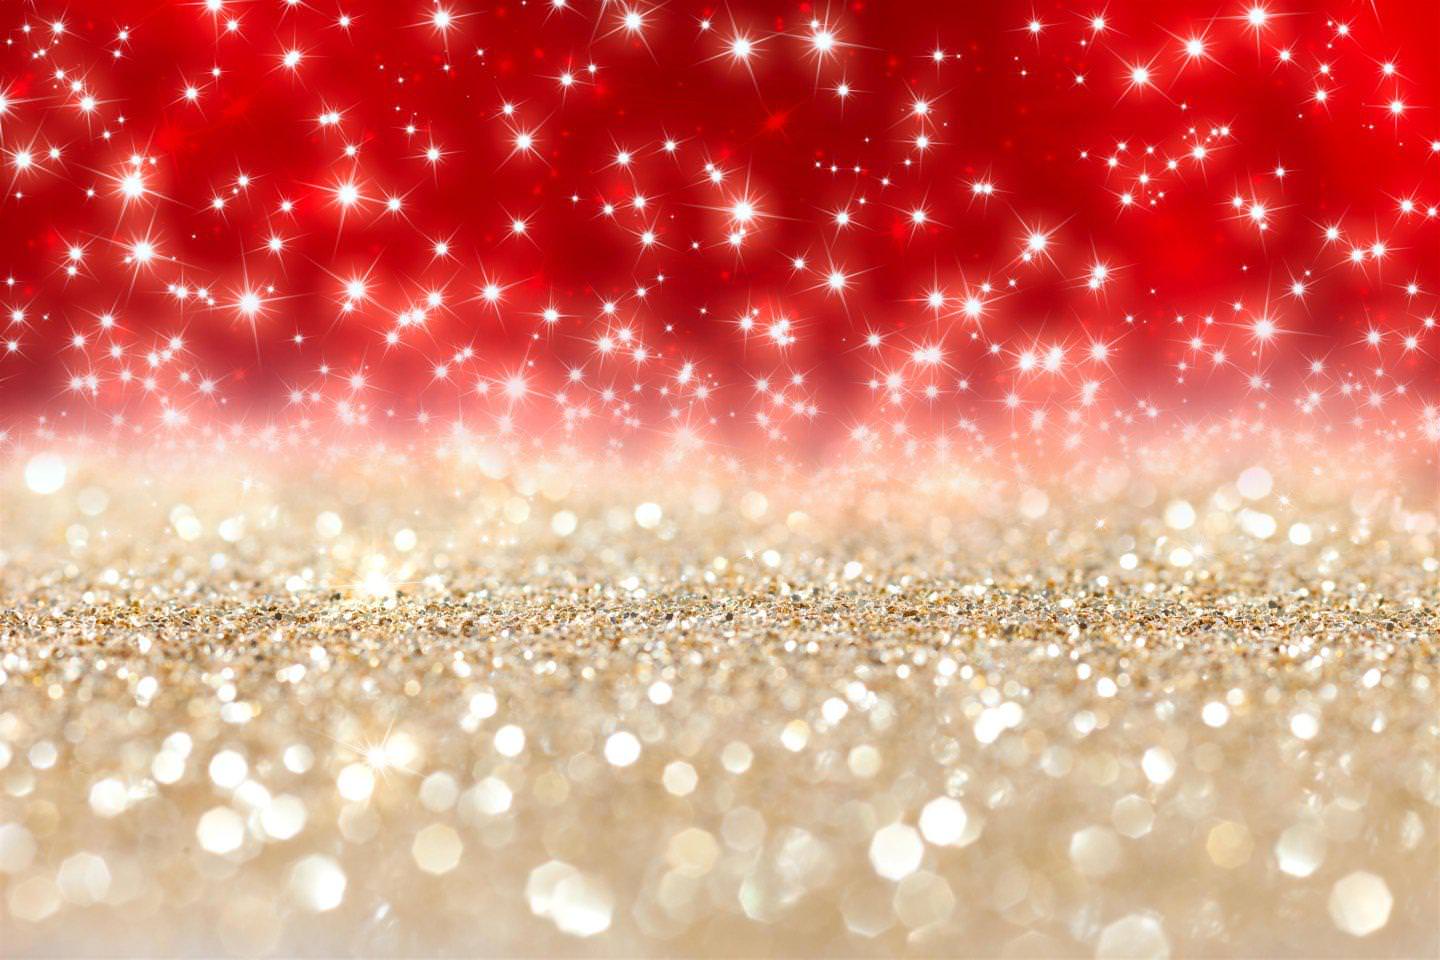 Free download 10 Silver Glitter Backgrounds Wallpapers FreeCreatives